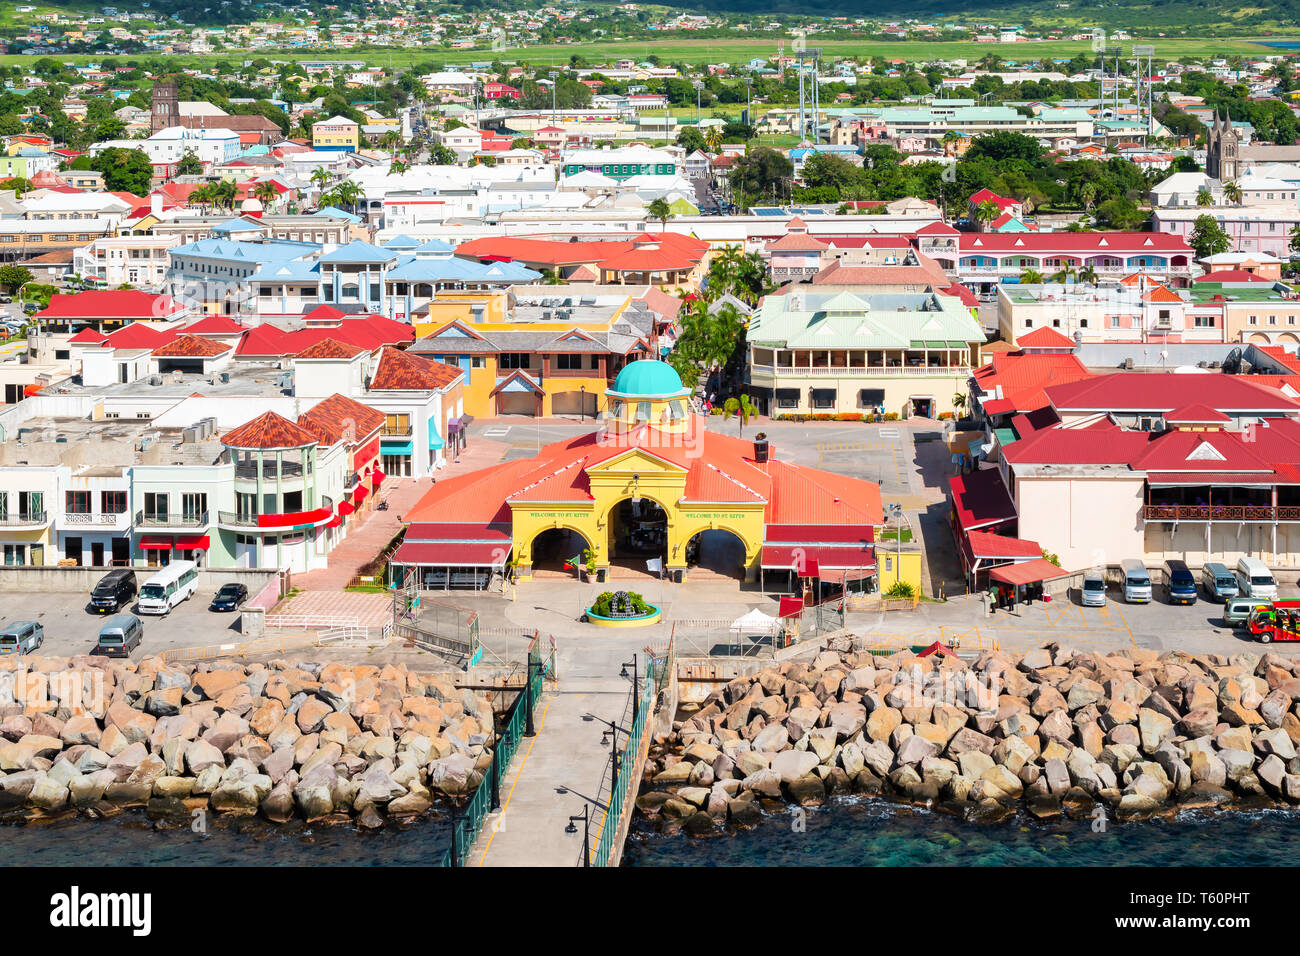 Basseterre, Saint Kitts and Nevis. Town at the port Stock Photo